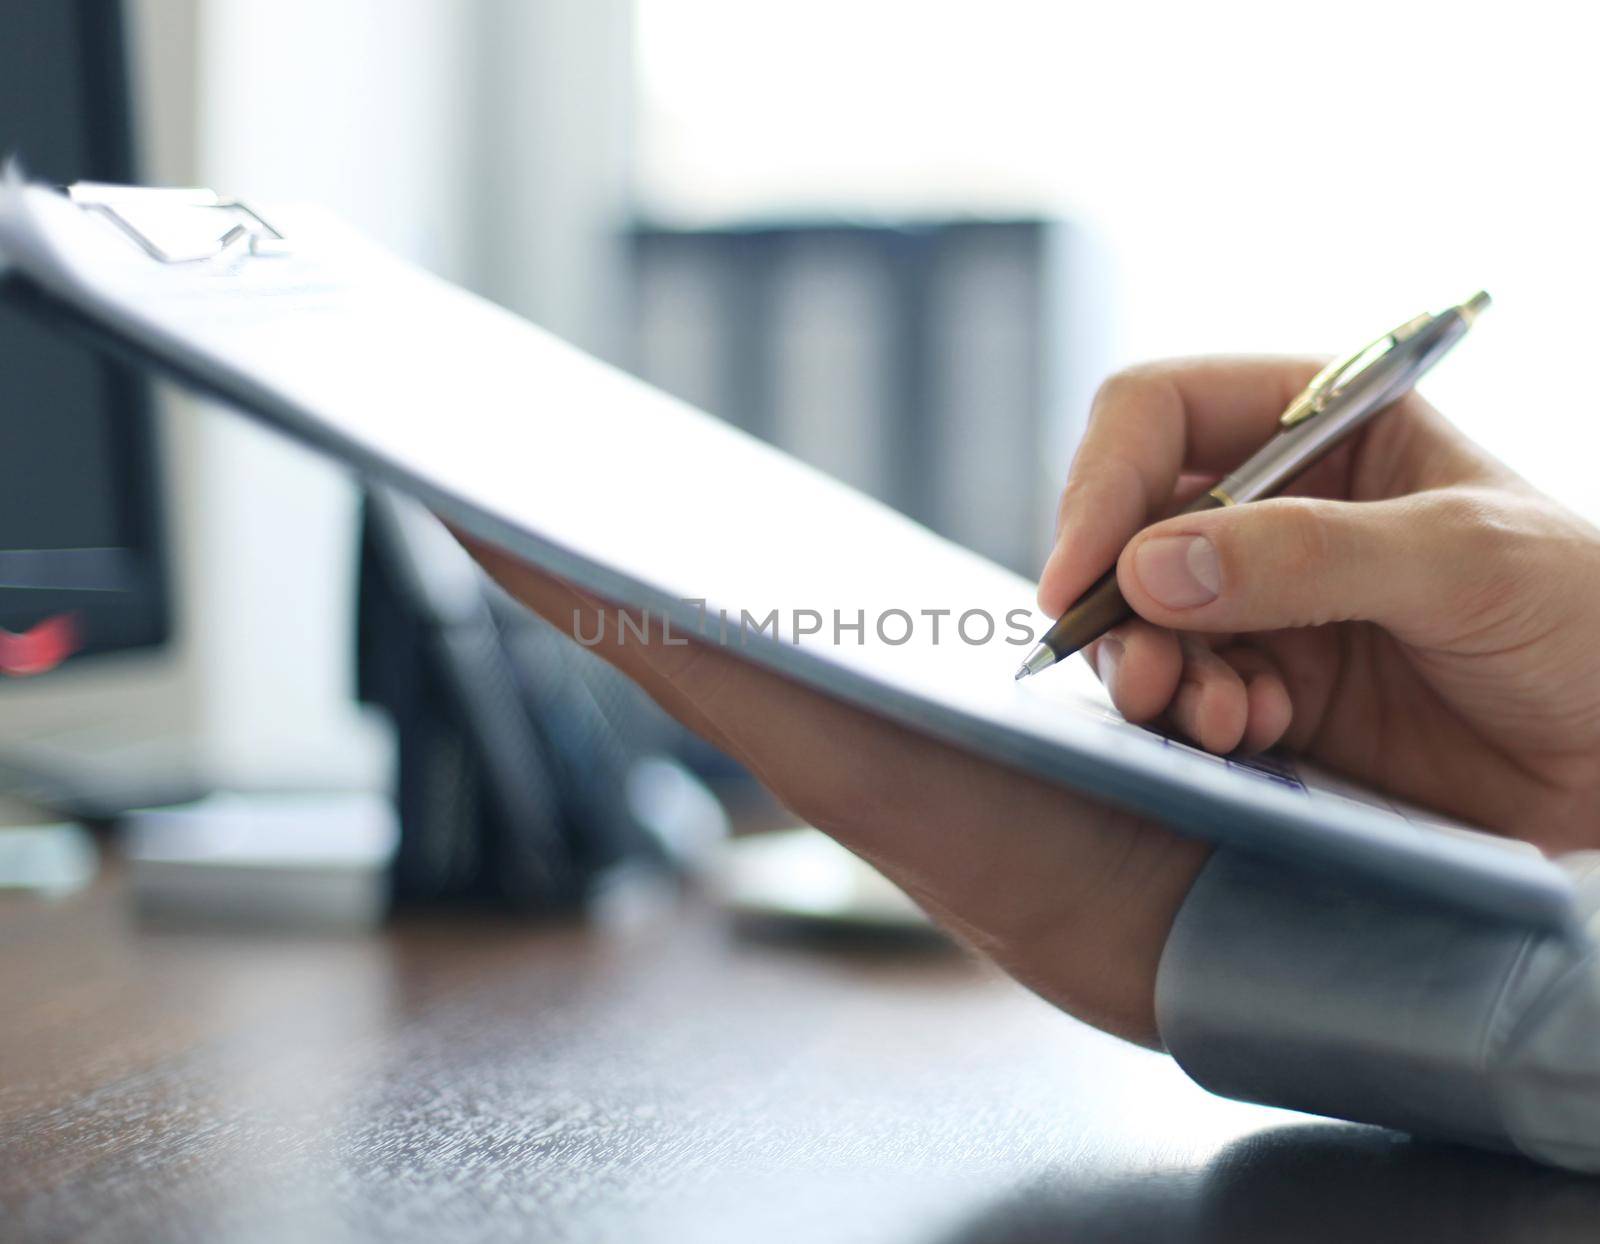 Business lady taking business notes at office